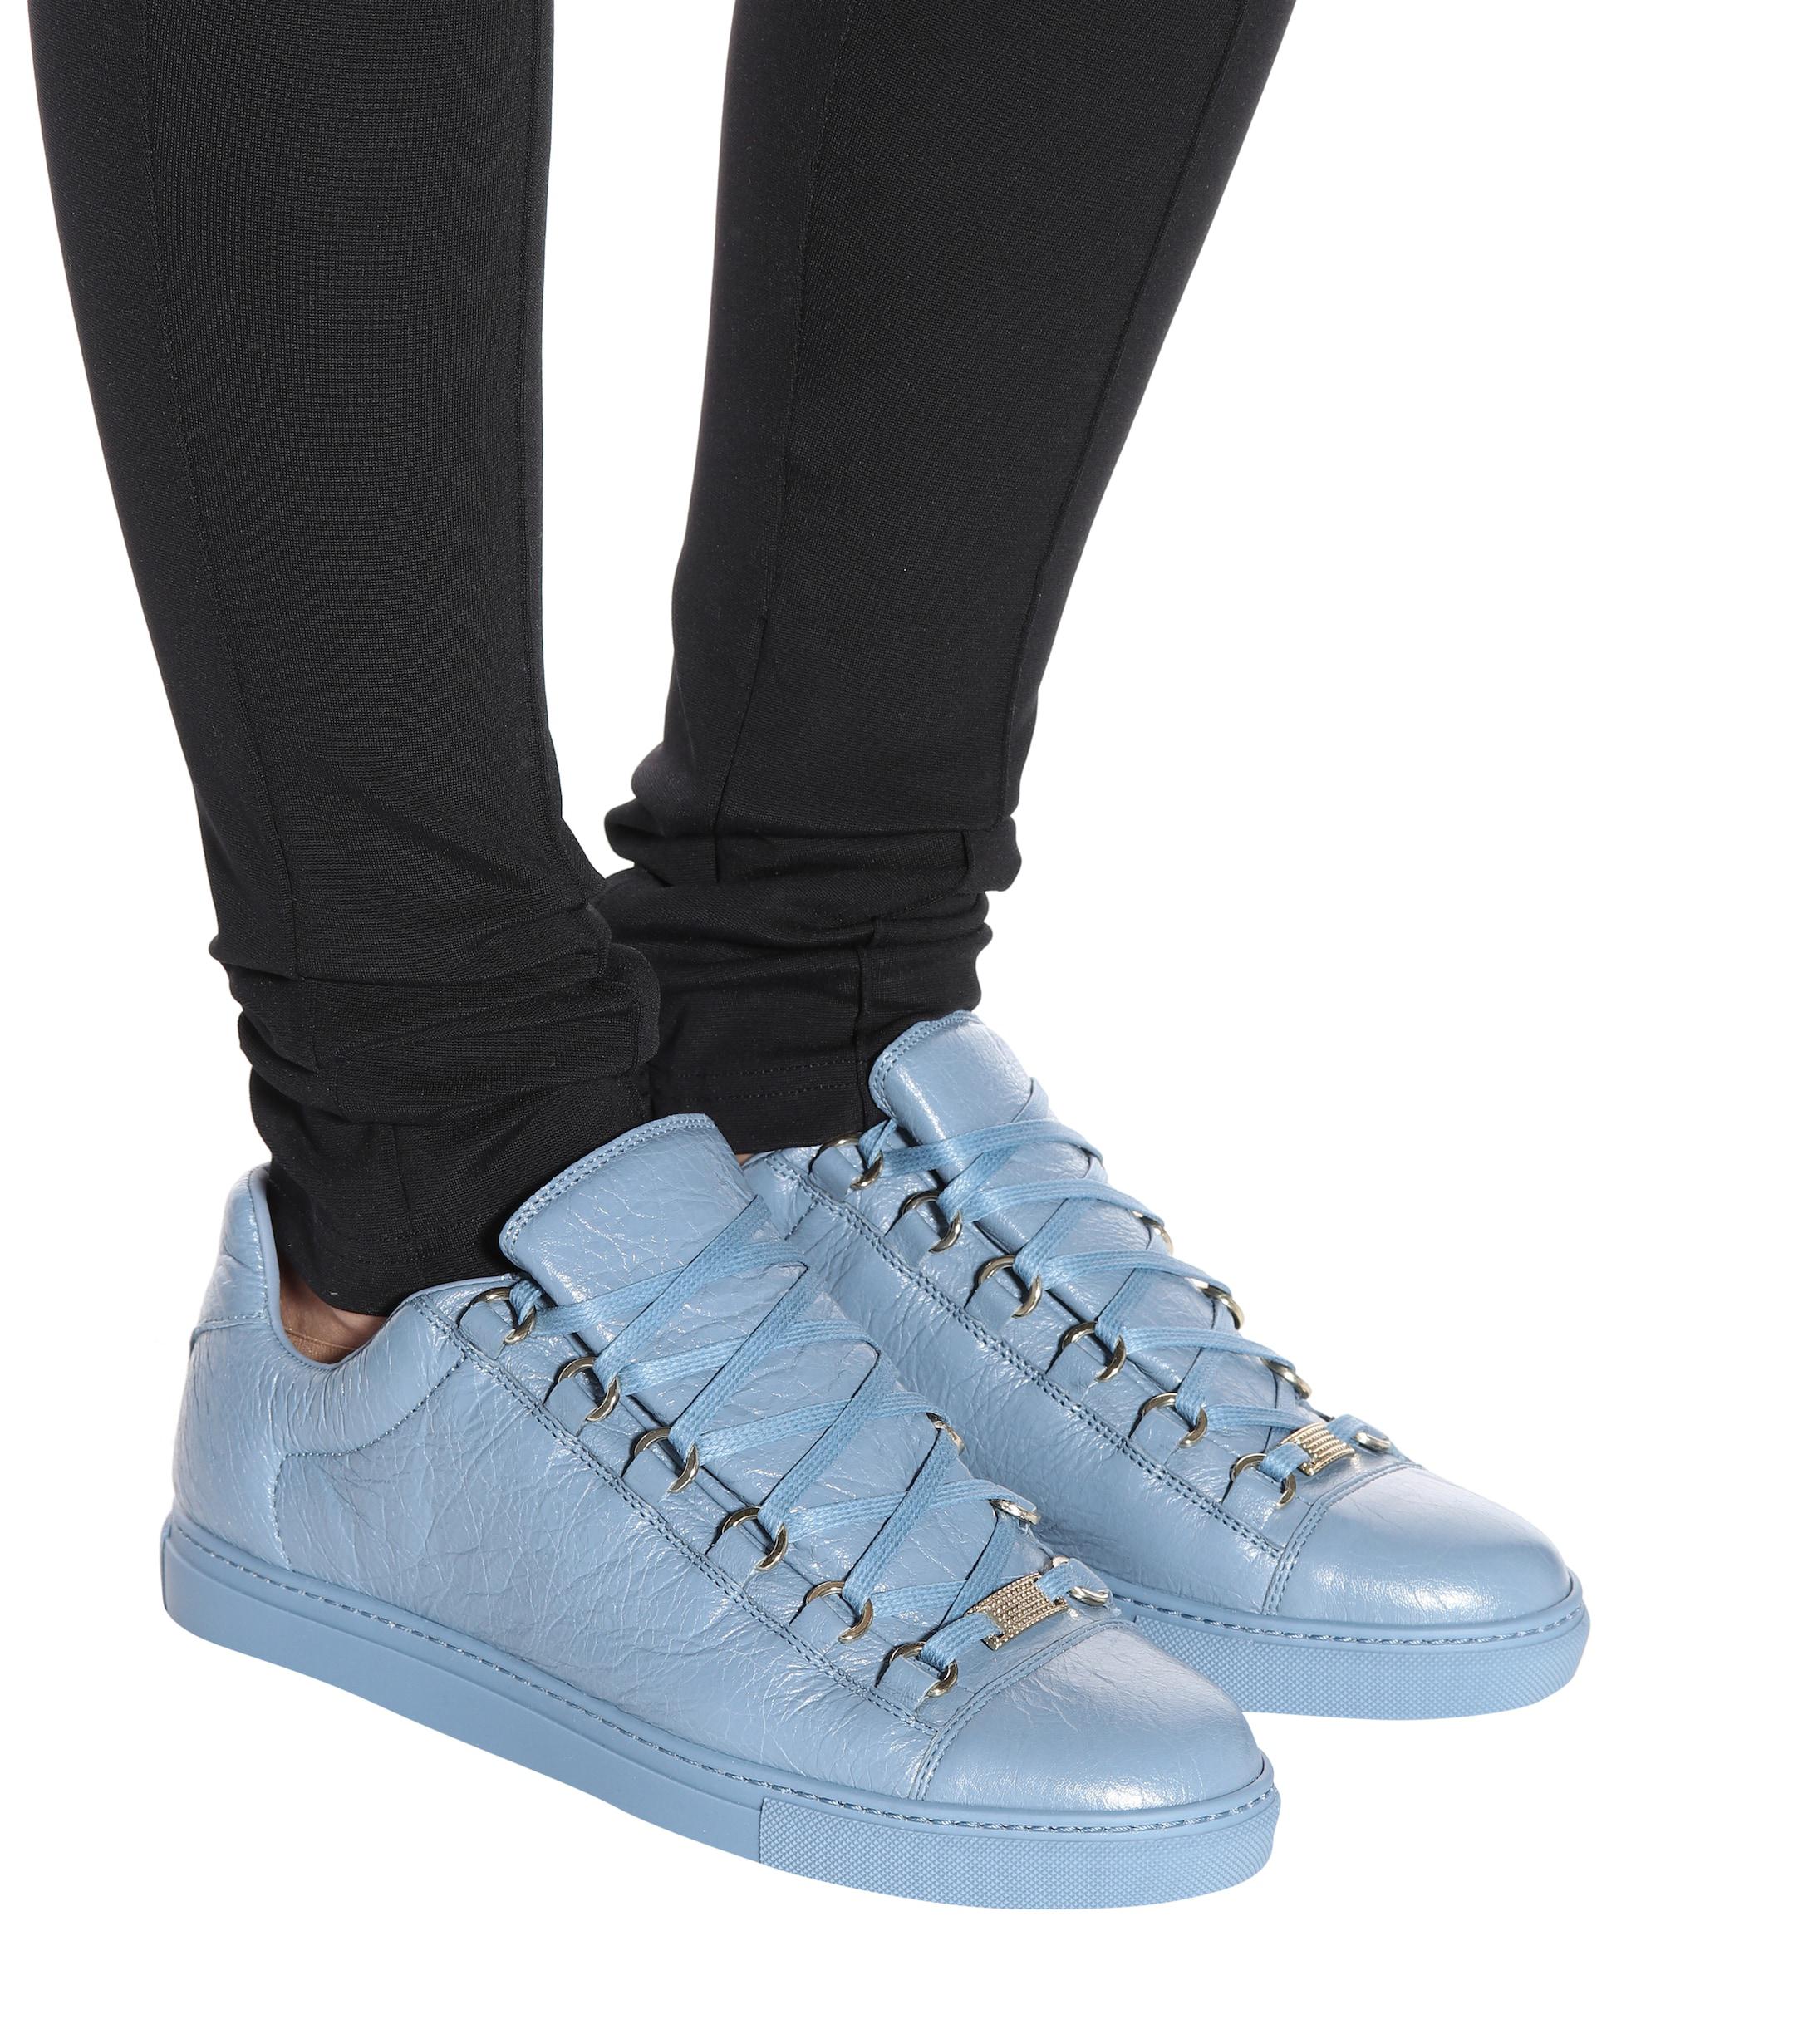 Balenciaga Arena Leather Sneakers in Blue | Lyst